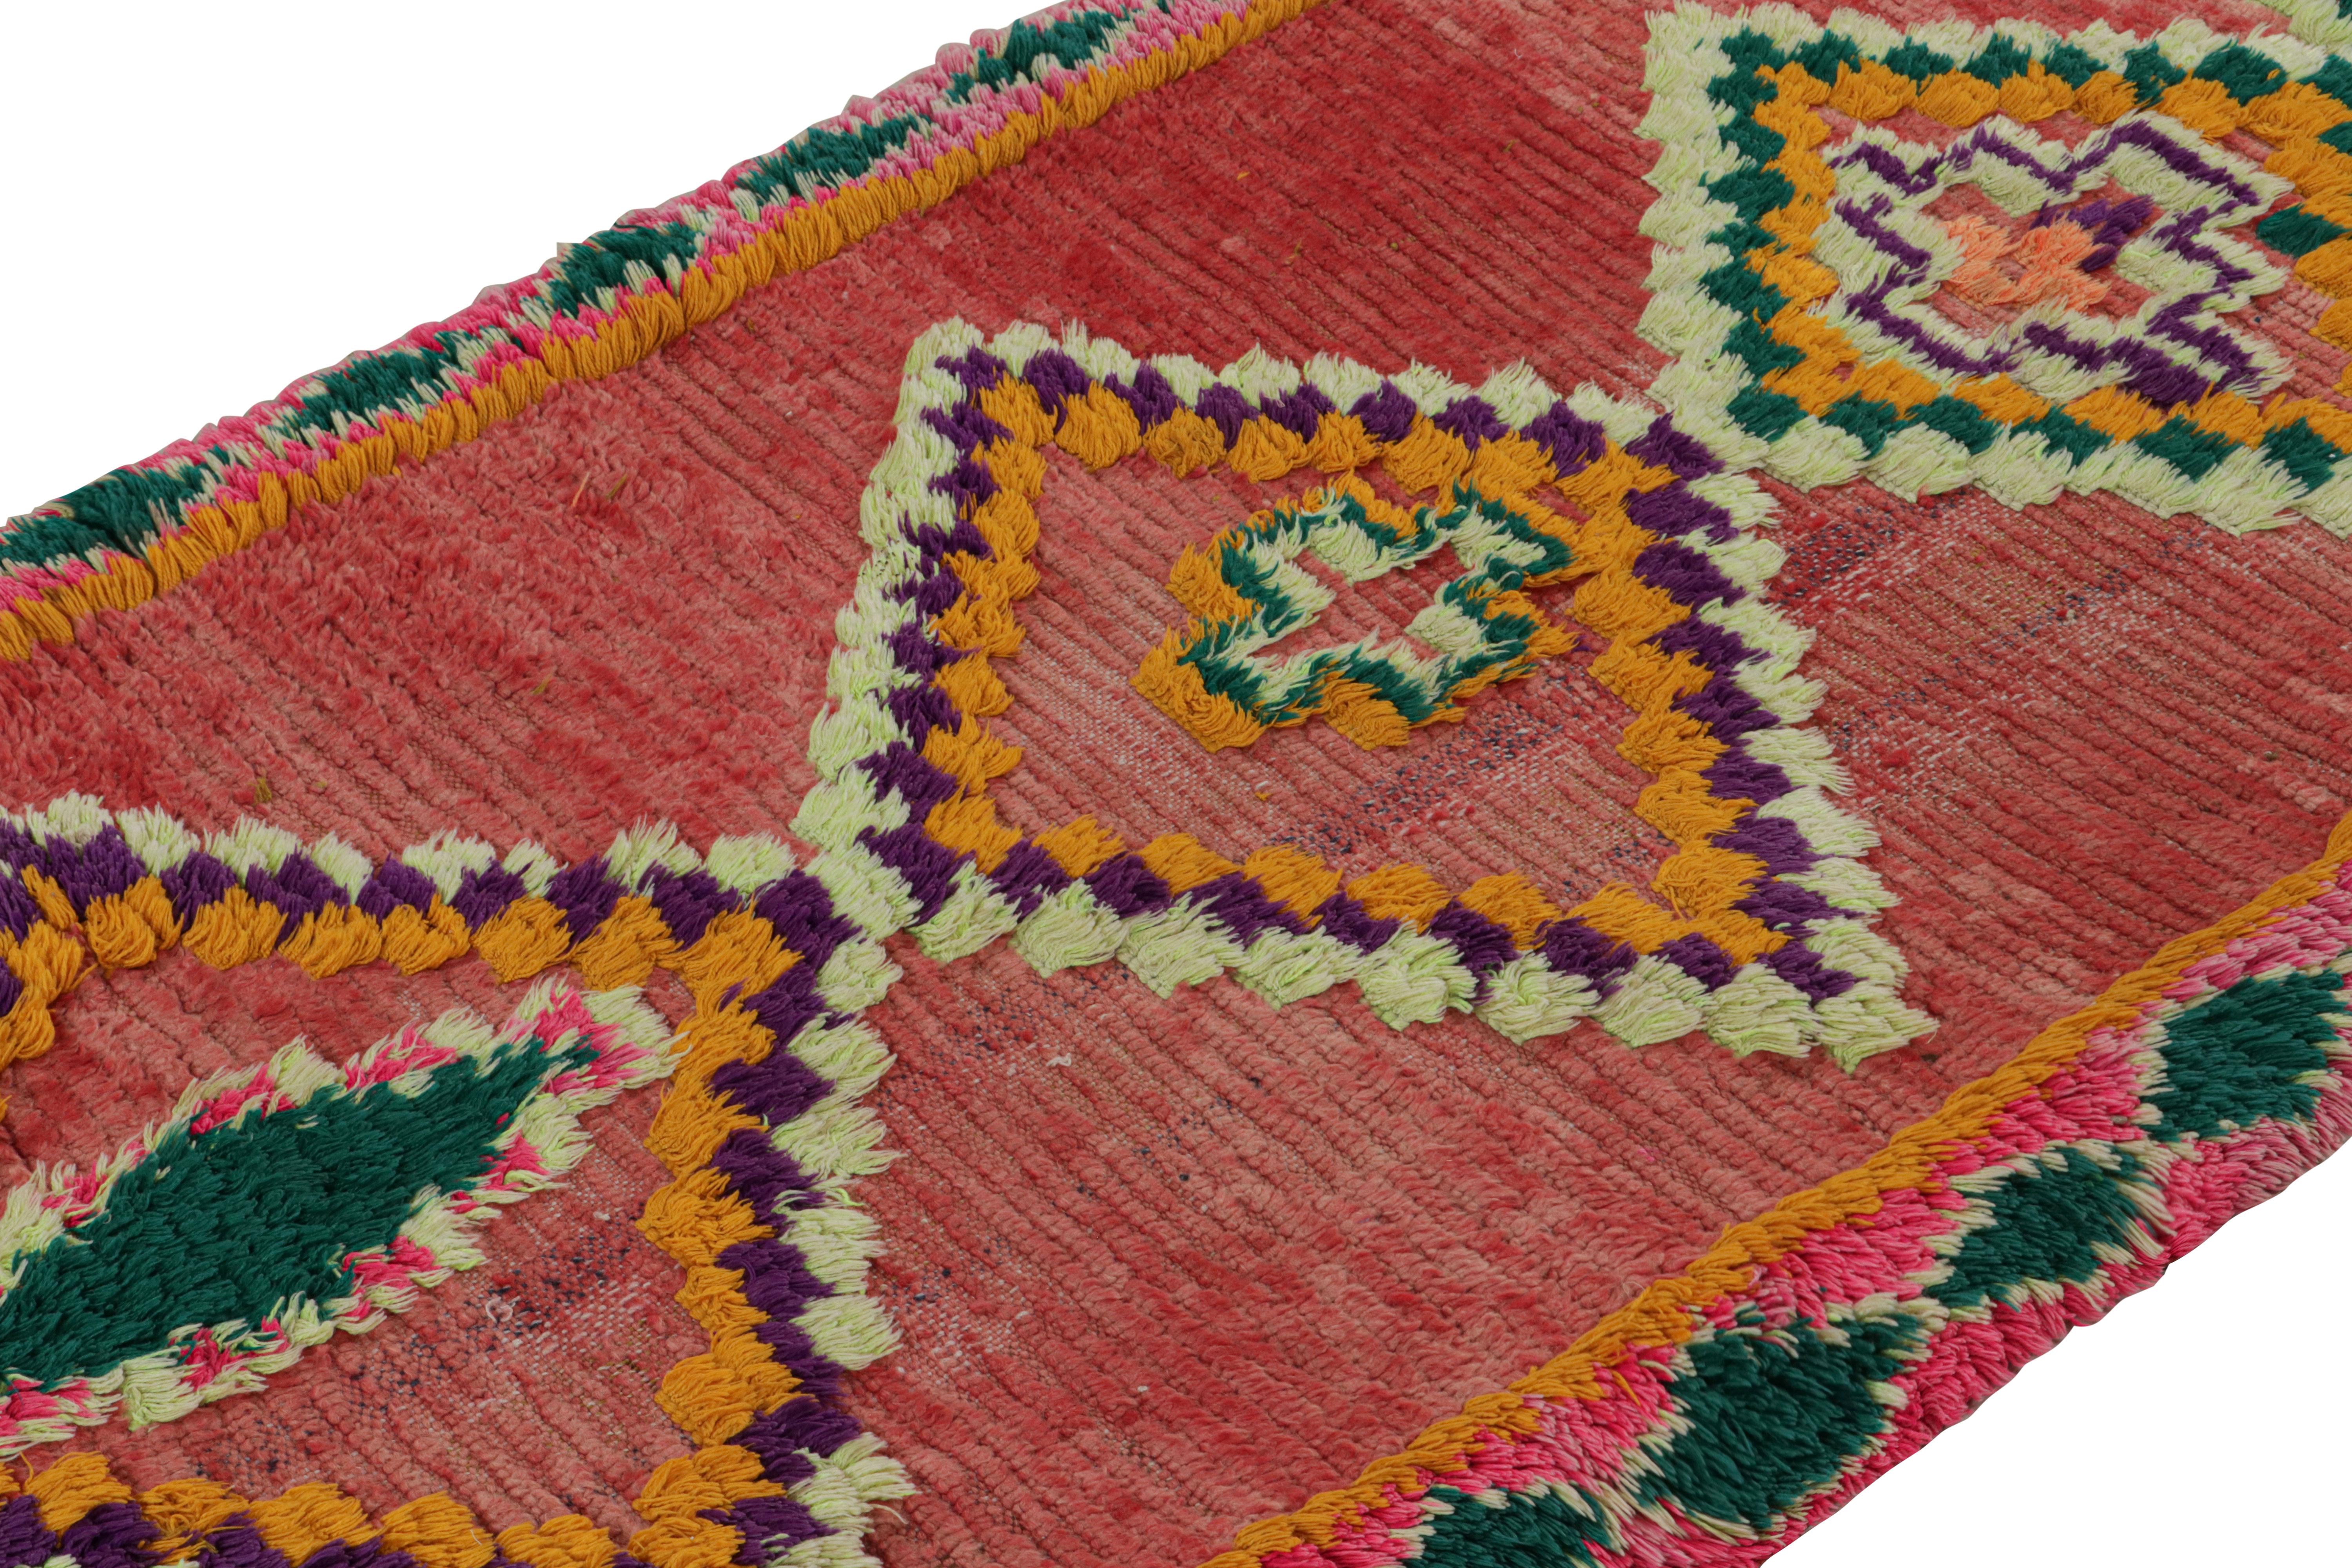 Vintage Moroccan Runner Rug in Red with Diamond Medallions, from Rug & Kilim  In Good Condition For Sale In Long Island City, NY